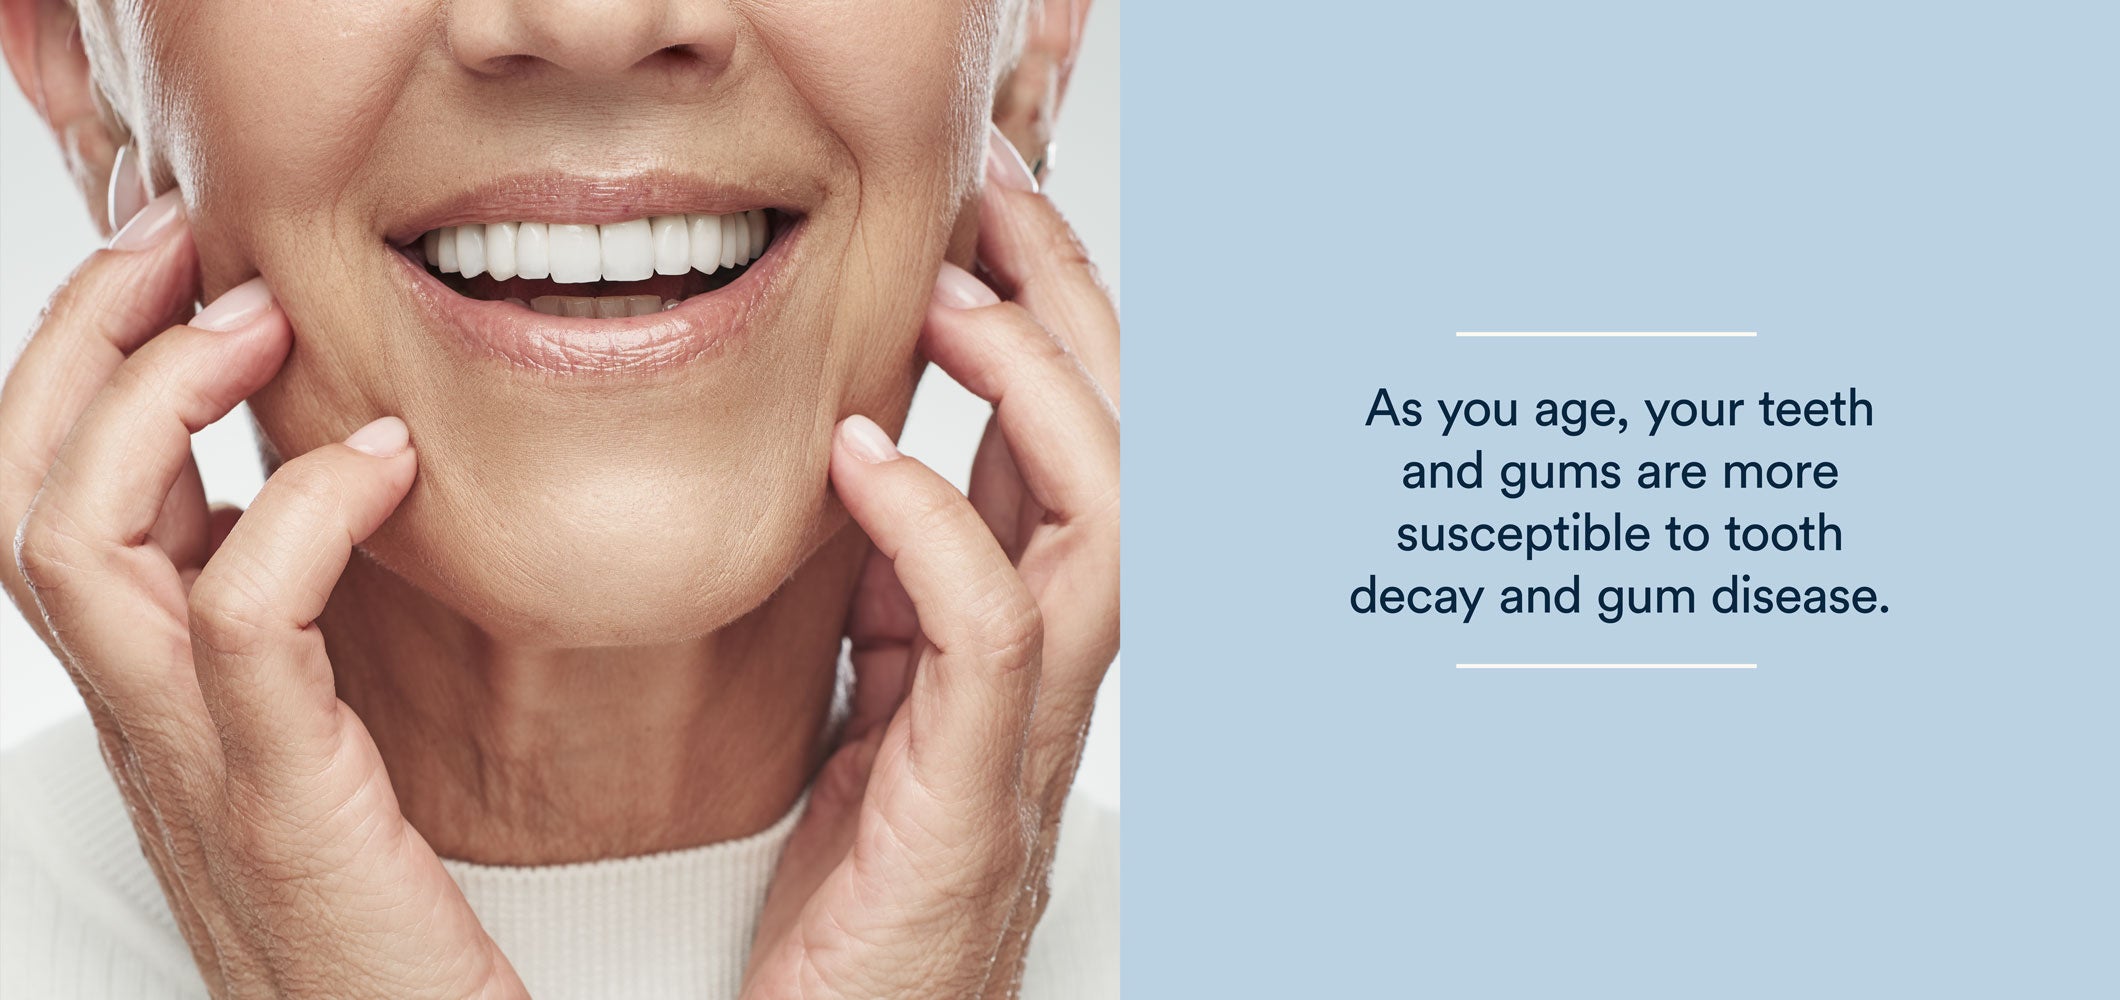 as you age, your teeth and gums are more susceptible to tooth decay and gum disease.